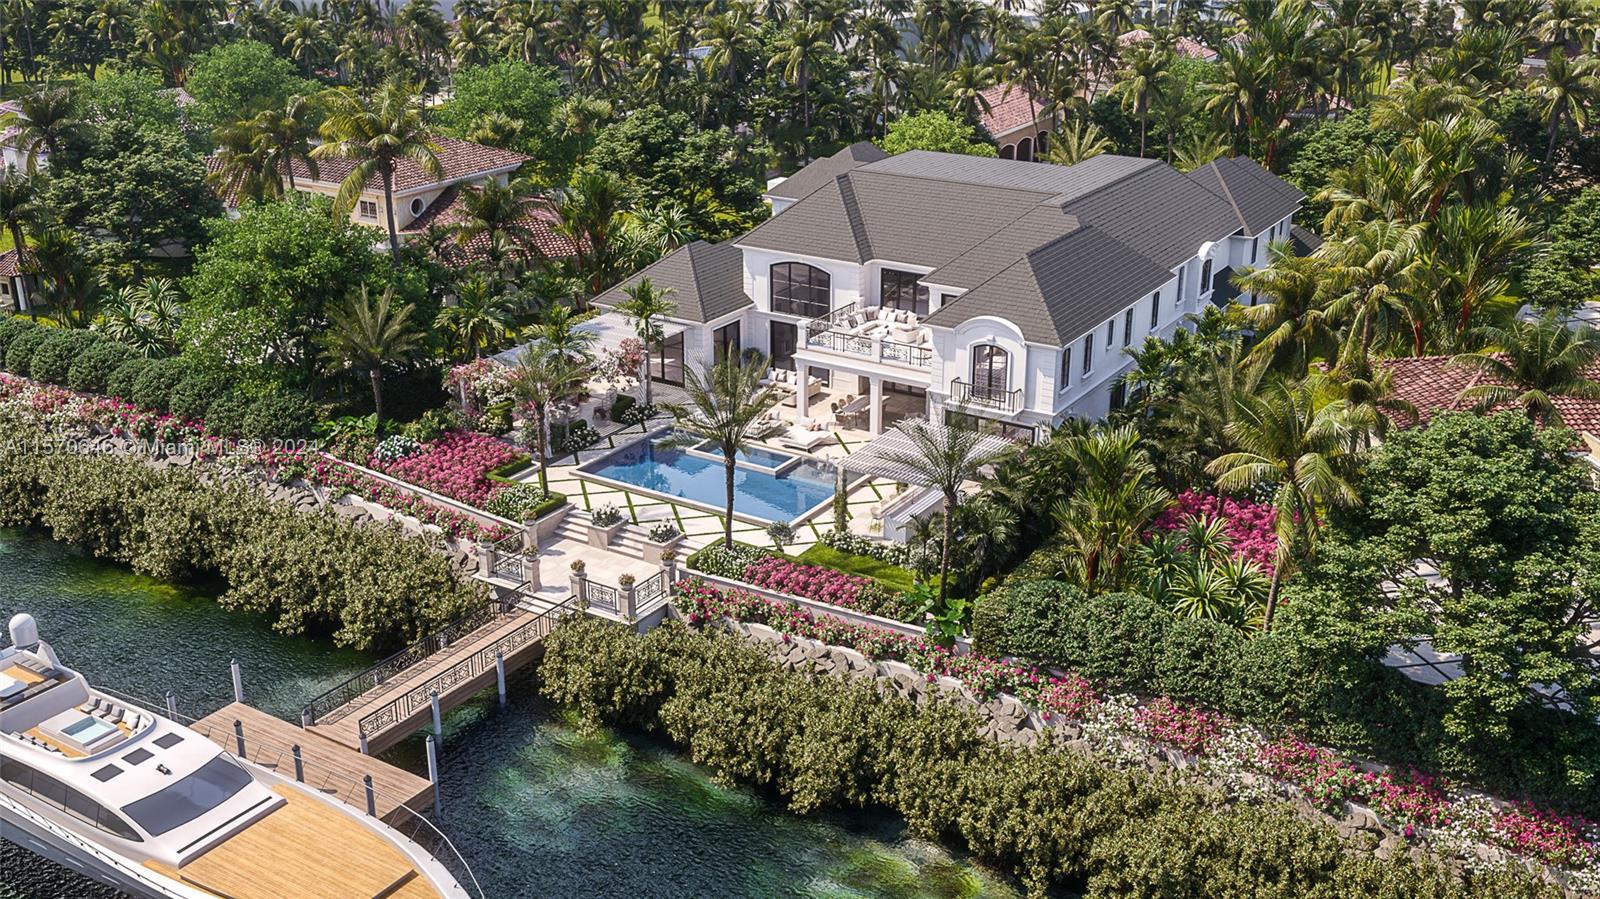 Welcome to your future oasis in the prestigious community of Admirals Cove! This luxurious estate bo